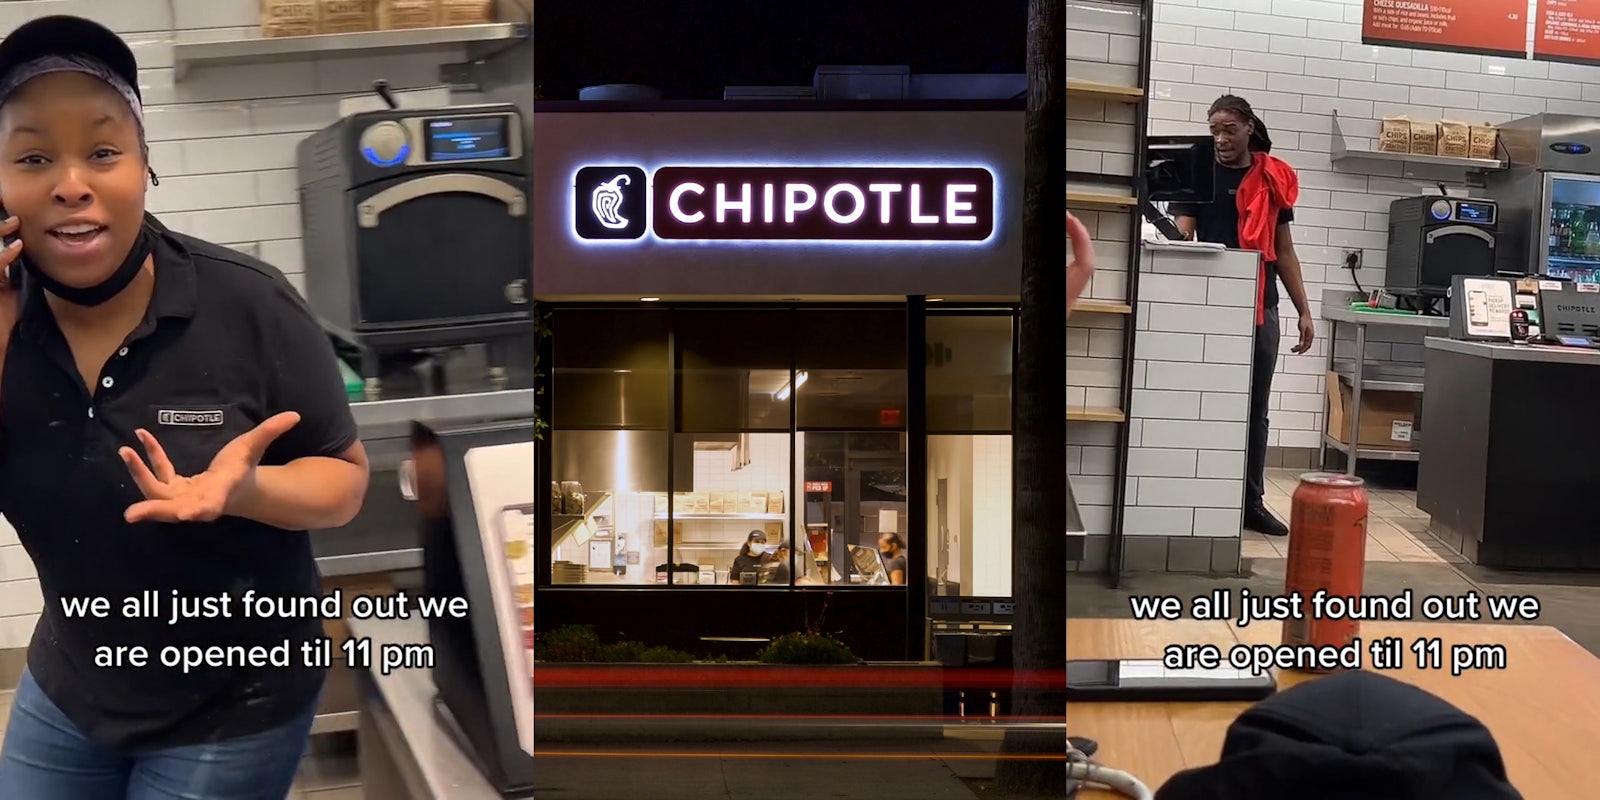 Chipotle employee speaking on phone caption 'we all just found out we are opened til 11 pm' (l) Chipotle sign on building at night (c) Chipotle employee speaking caption 'we all just found out we are opened til 11 pm' (r)